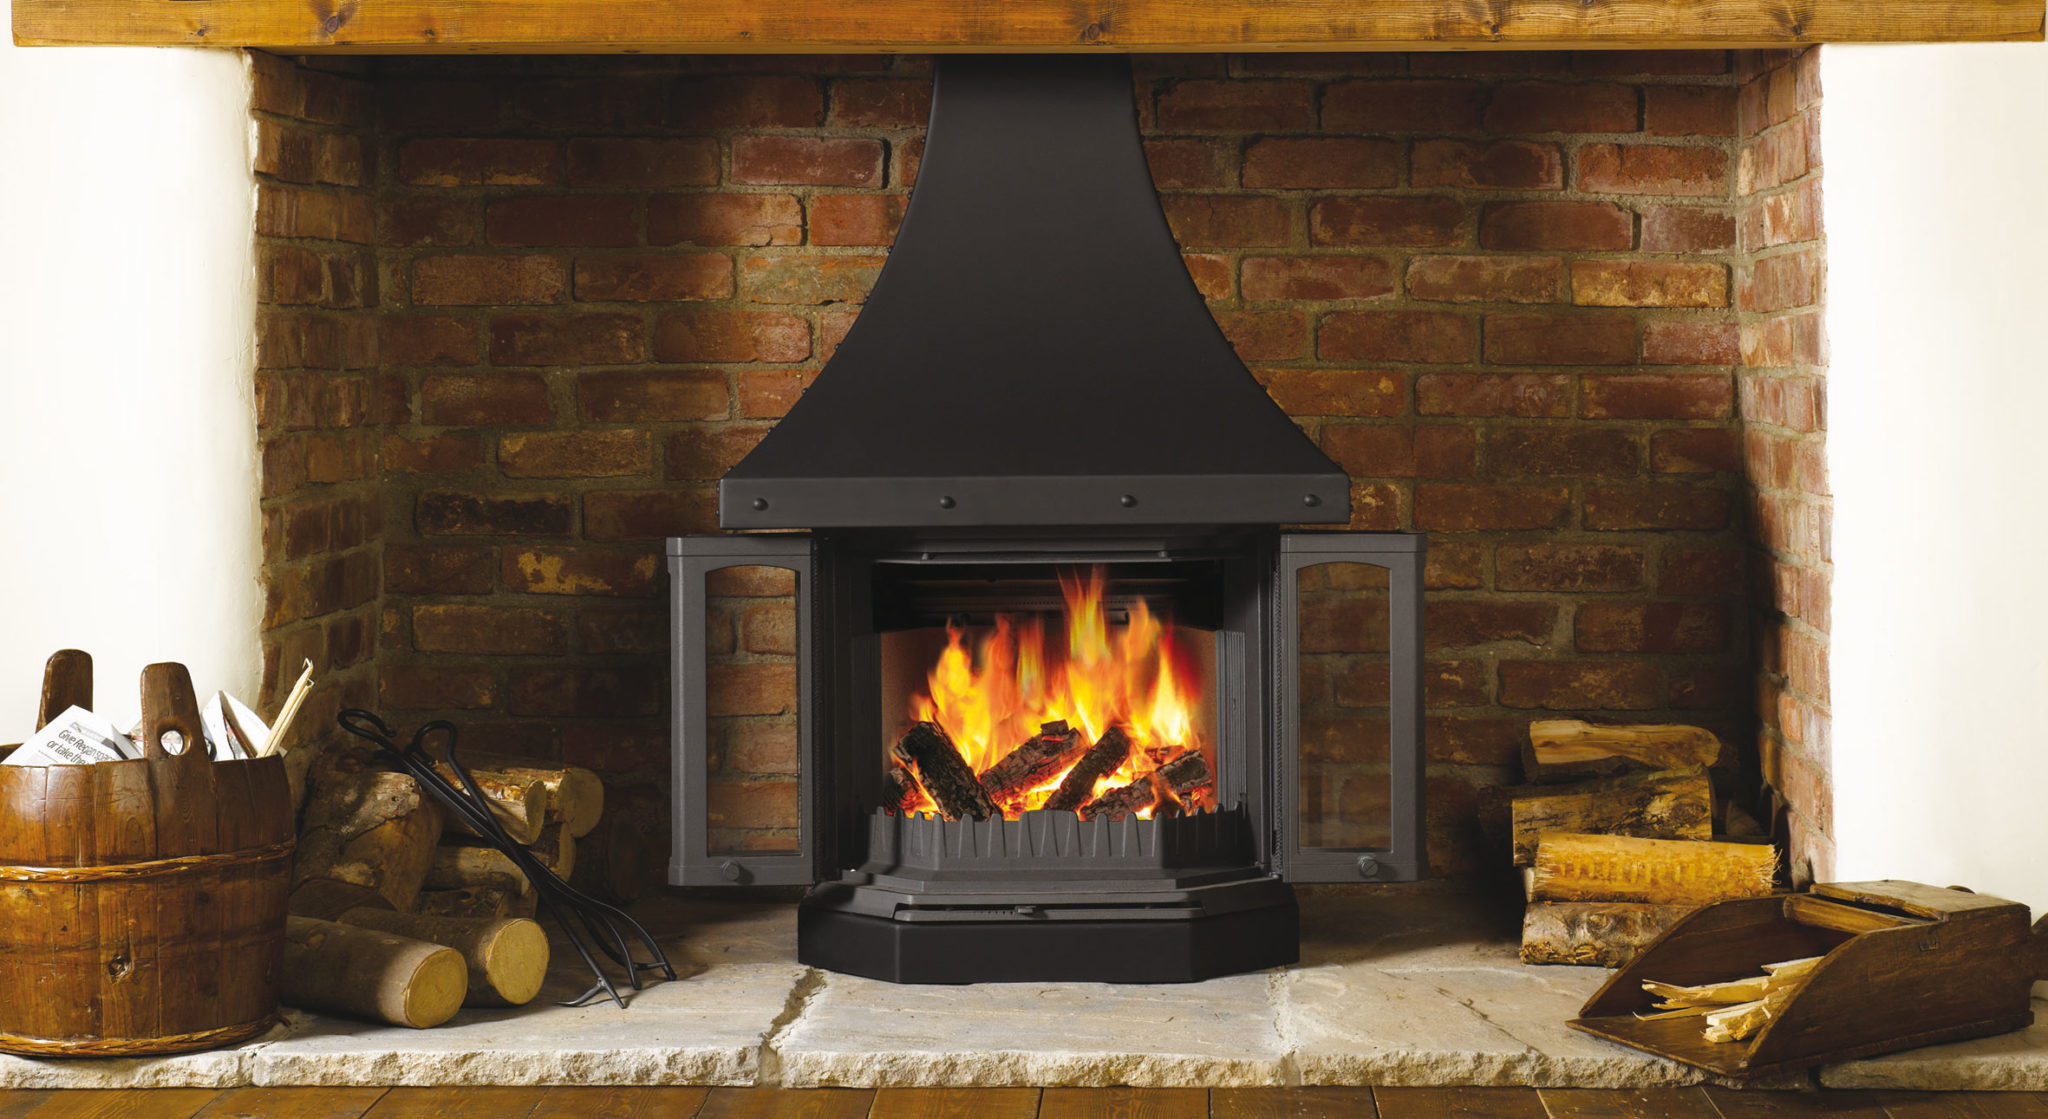 Say “no” to idle inglenooks with a Dovre fireplace